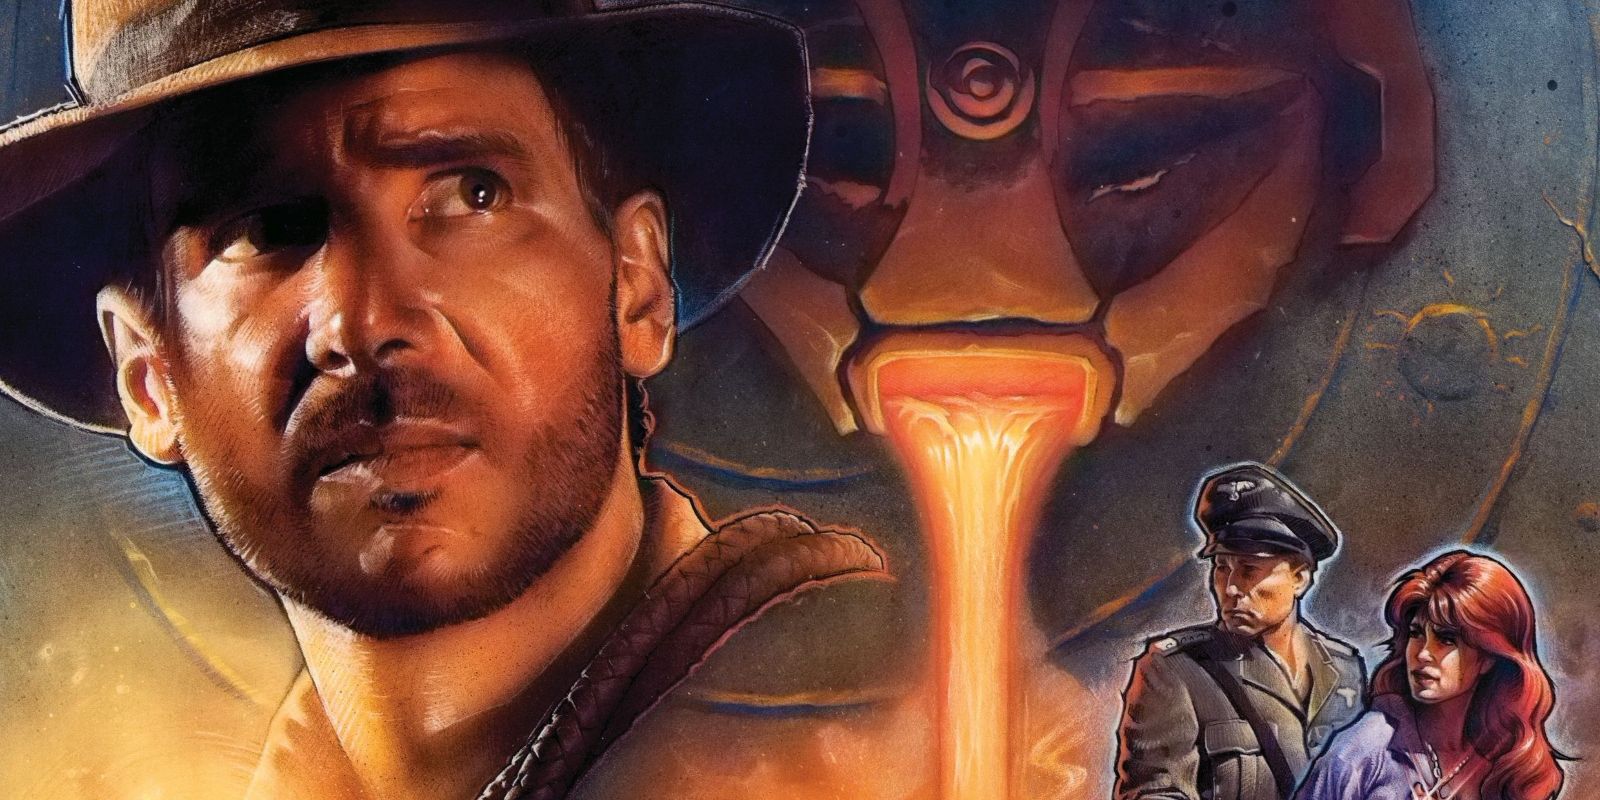 Indiana Jones' Story Should Continue in Games